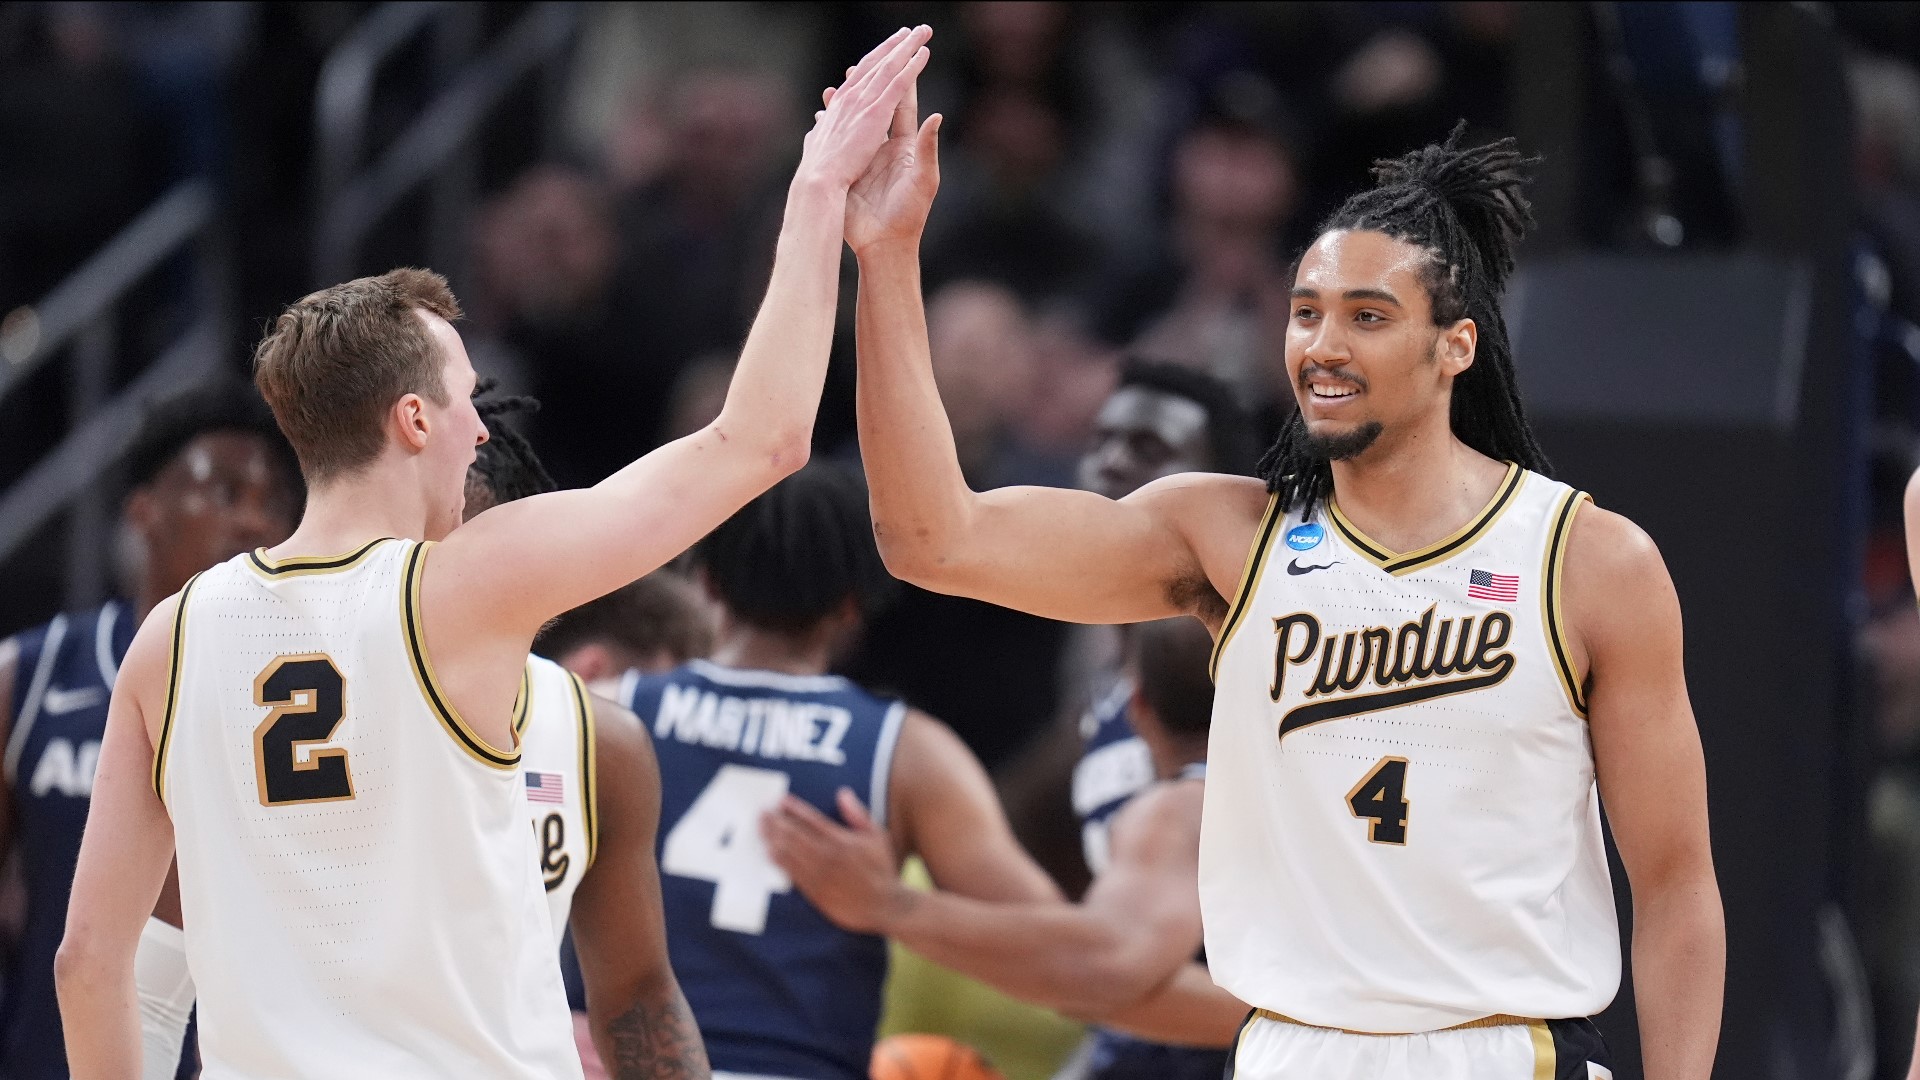 13Sports director Dave Calabro and 13Sports reporter Dominic Miranda recap Purdue men's basketball's second round victory over Utah State.